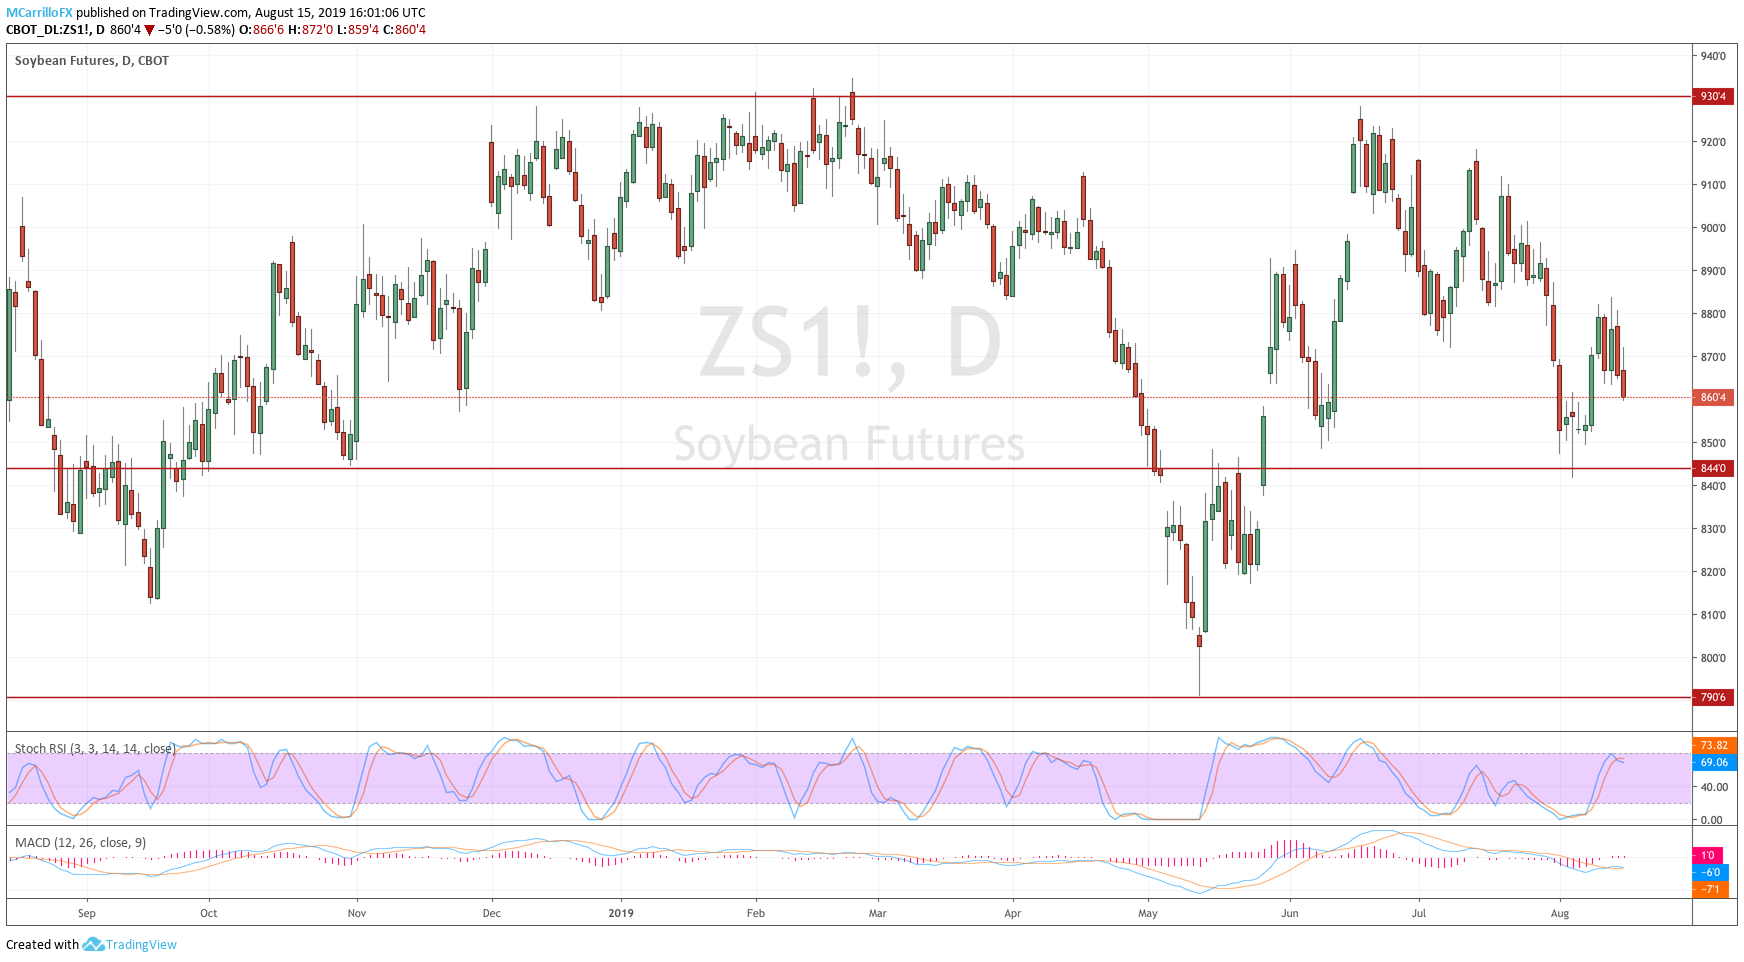 Prices of Soybeans Daily Chart August 15